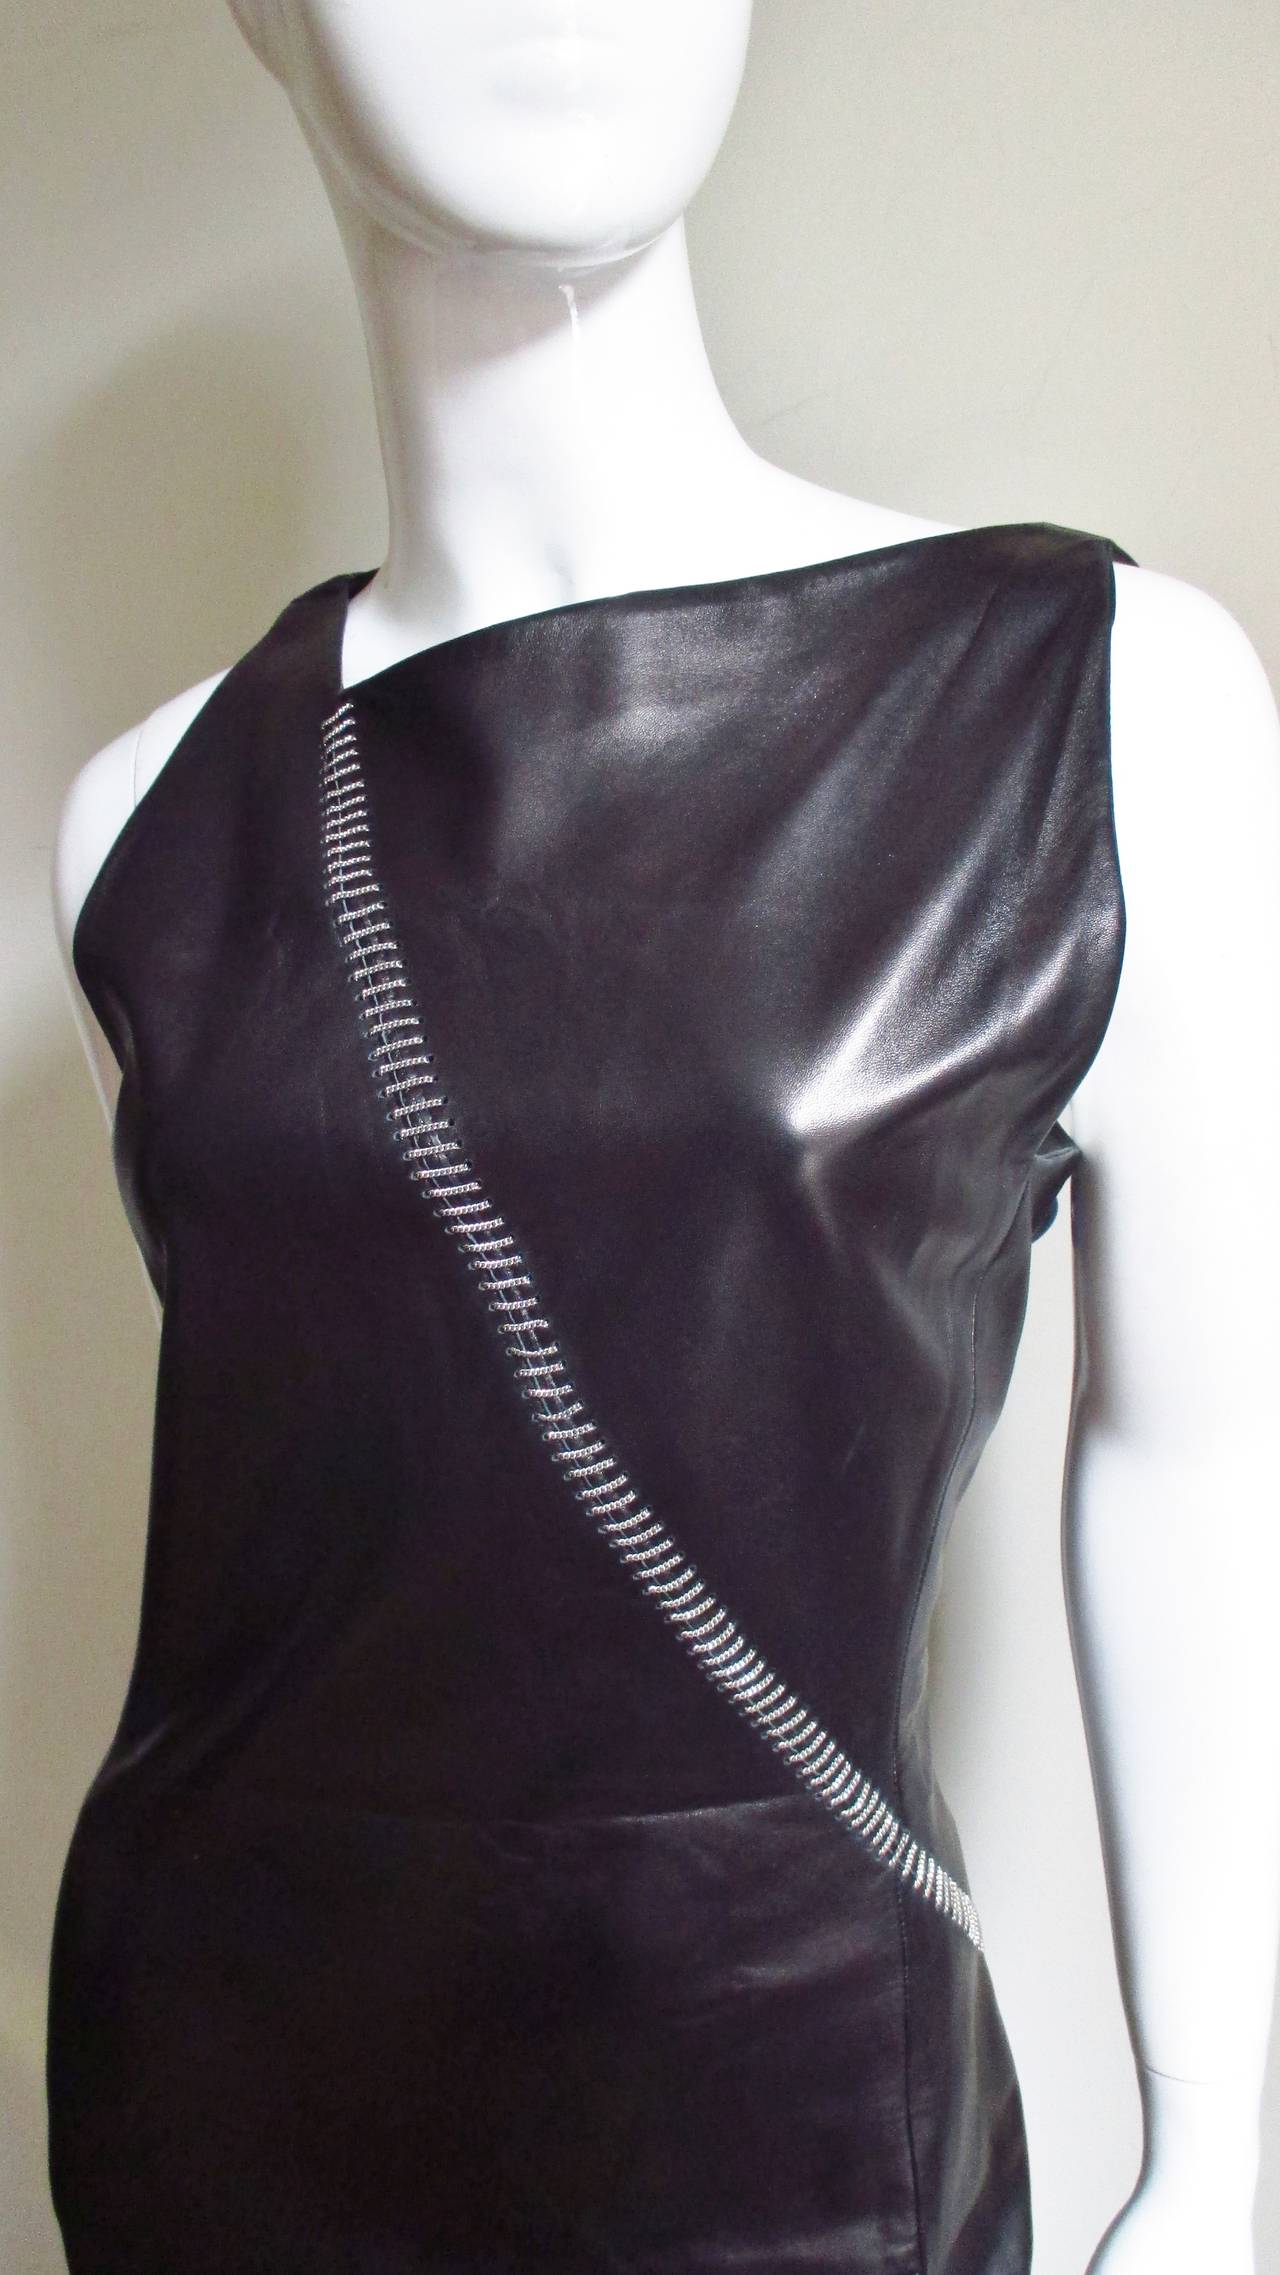 Women's 1990s Gianni Versace Leather Dress with Chains